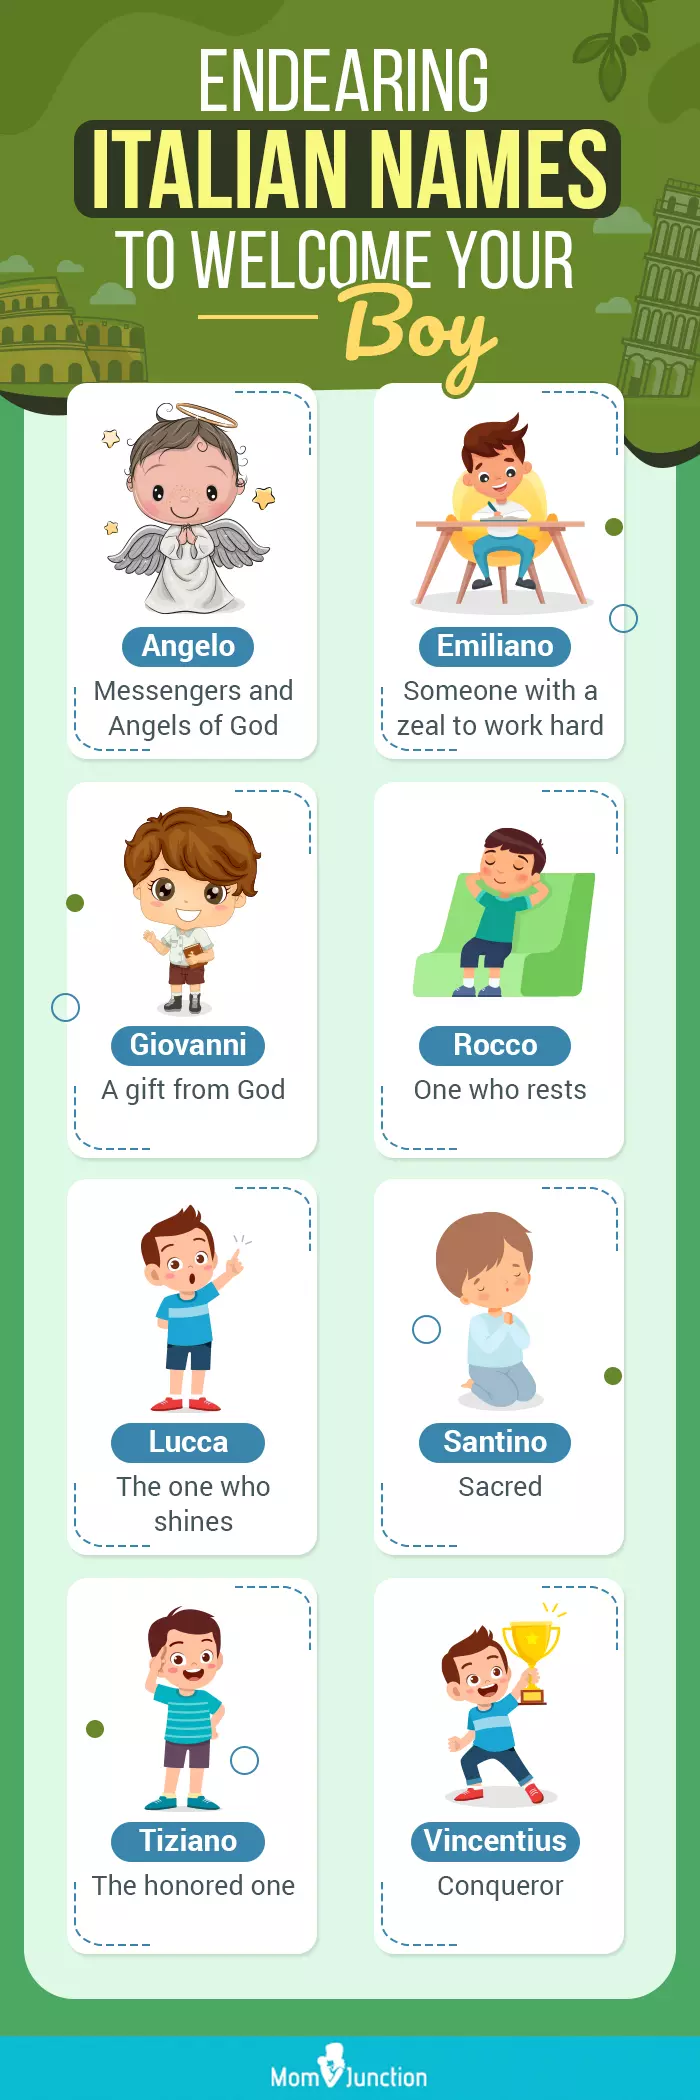 endearing italian names to welcome your boy (infographic)